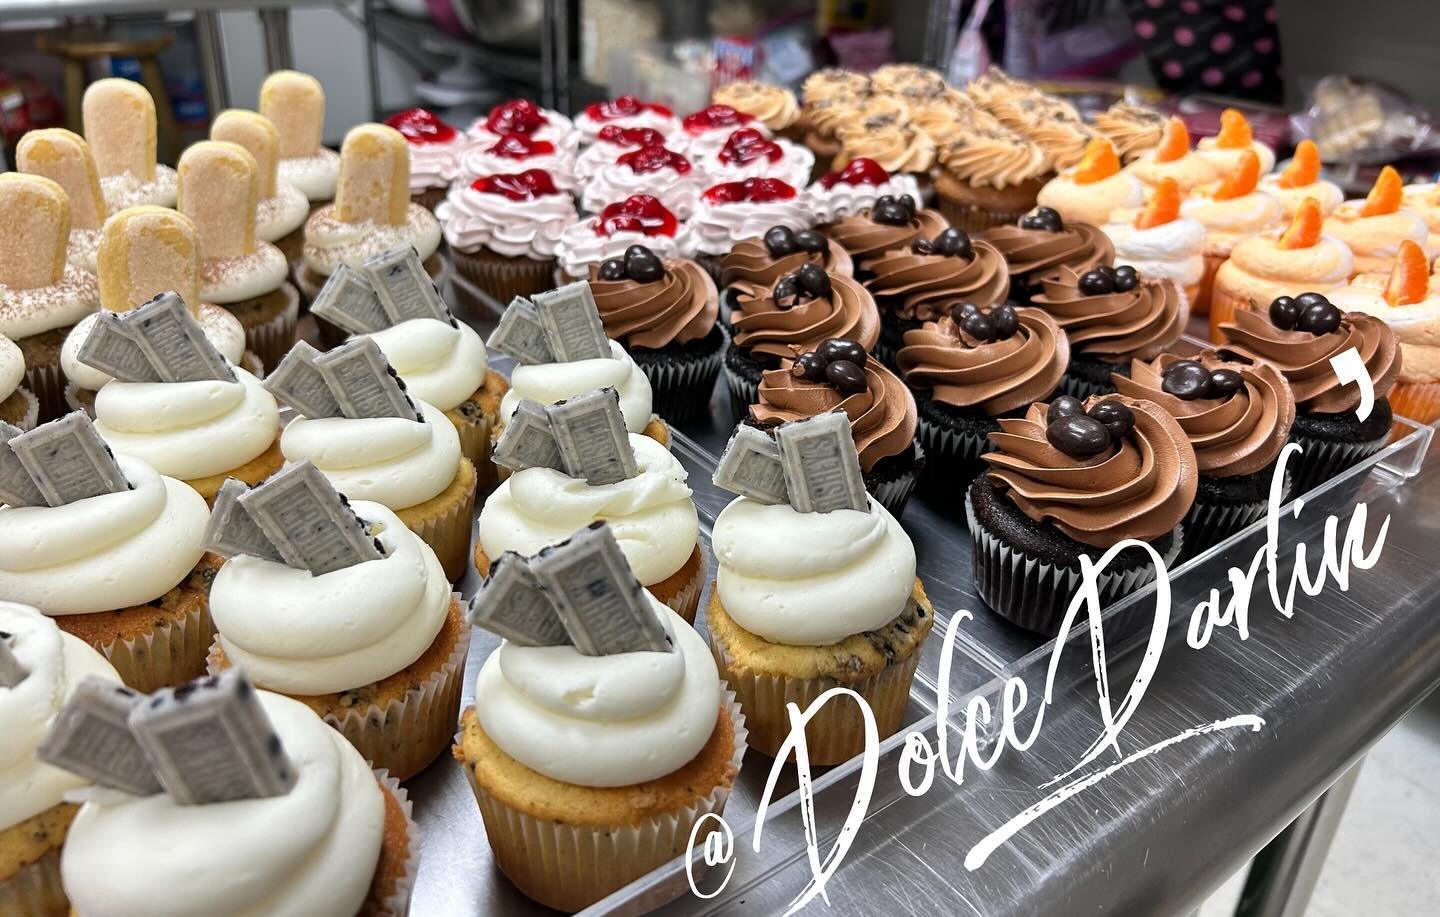 We have so many awesome flavors this week! Stop by for a visit and a little afternoon pick me up. 😉😍 🧁